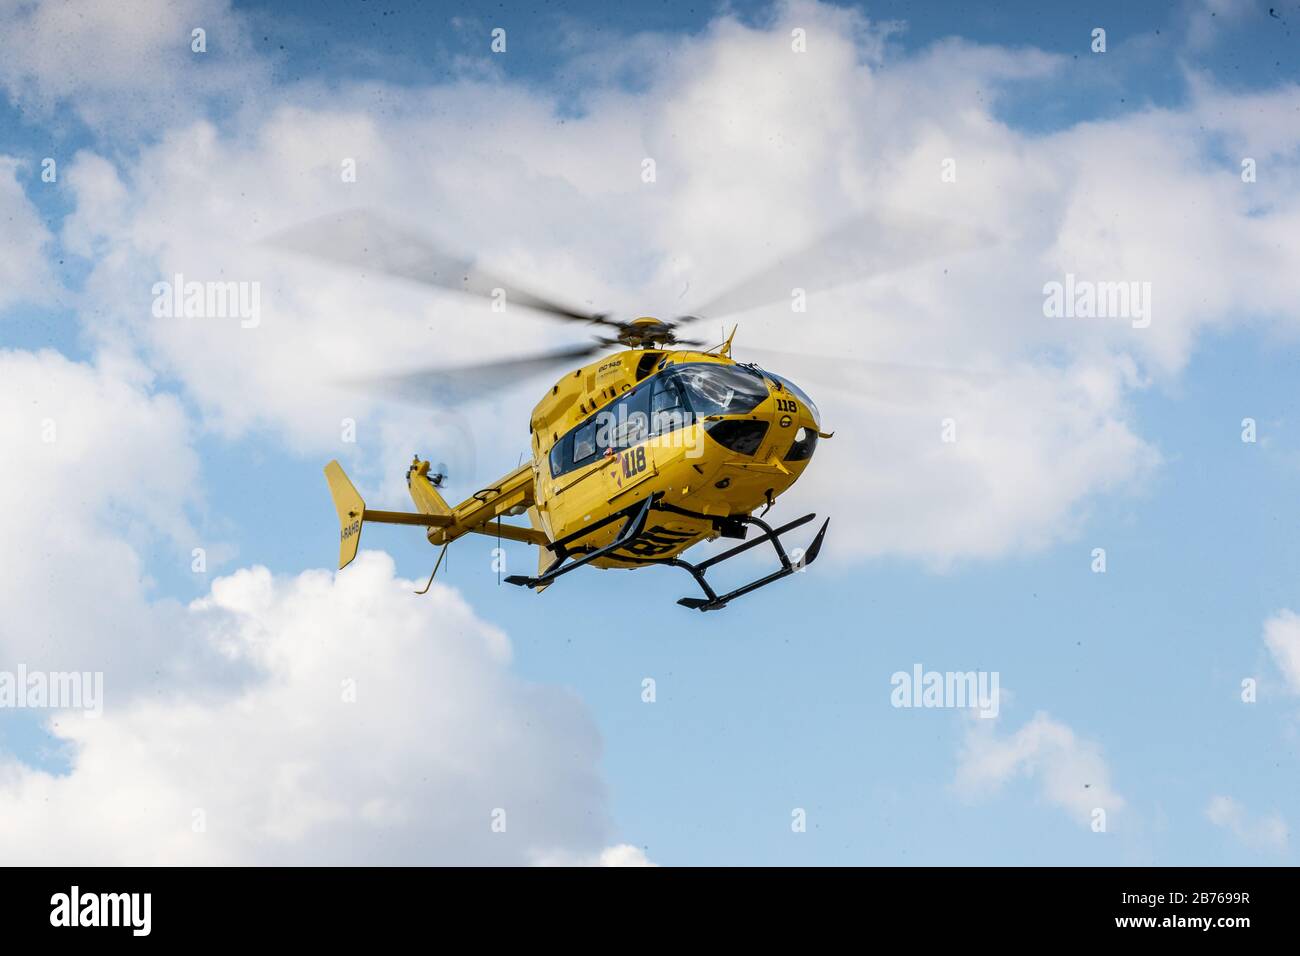 Ferrara, March 13, 2020. A rescue helicopter transports patients affected by coronavirus in Ferrara, Italy. Credit: Filippo Rubin / Alamy Live News Stock Photo